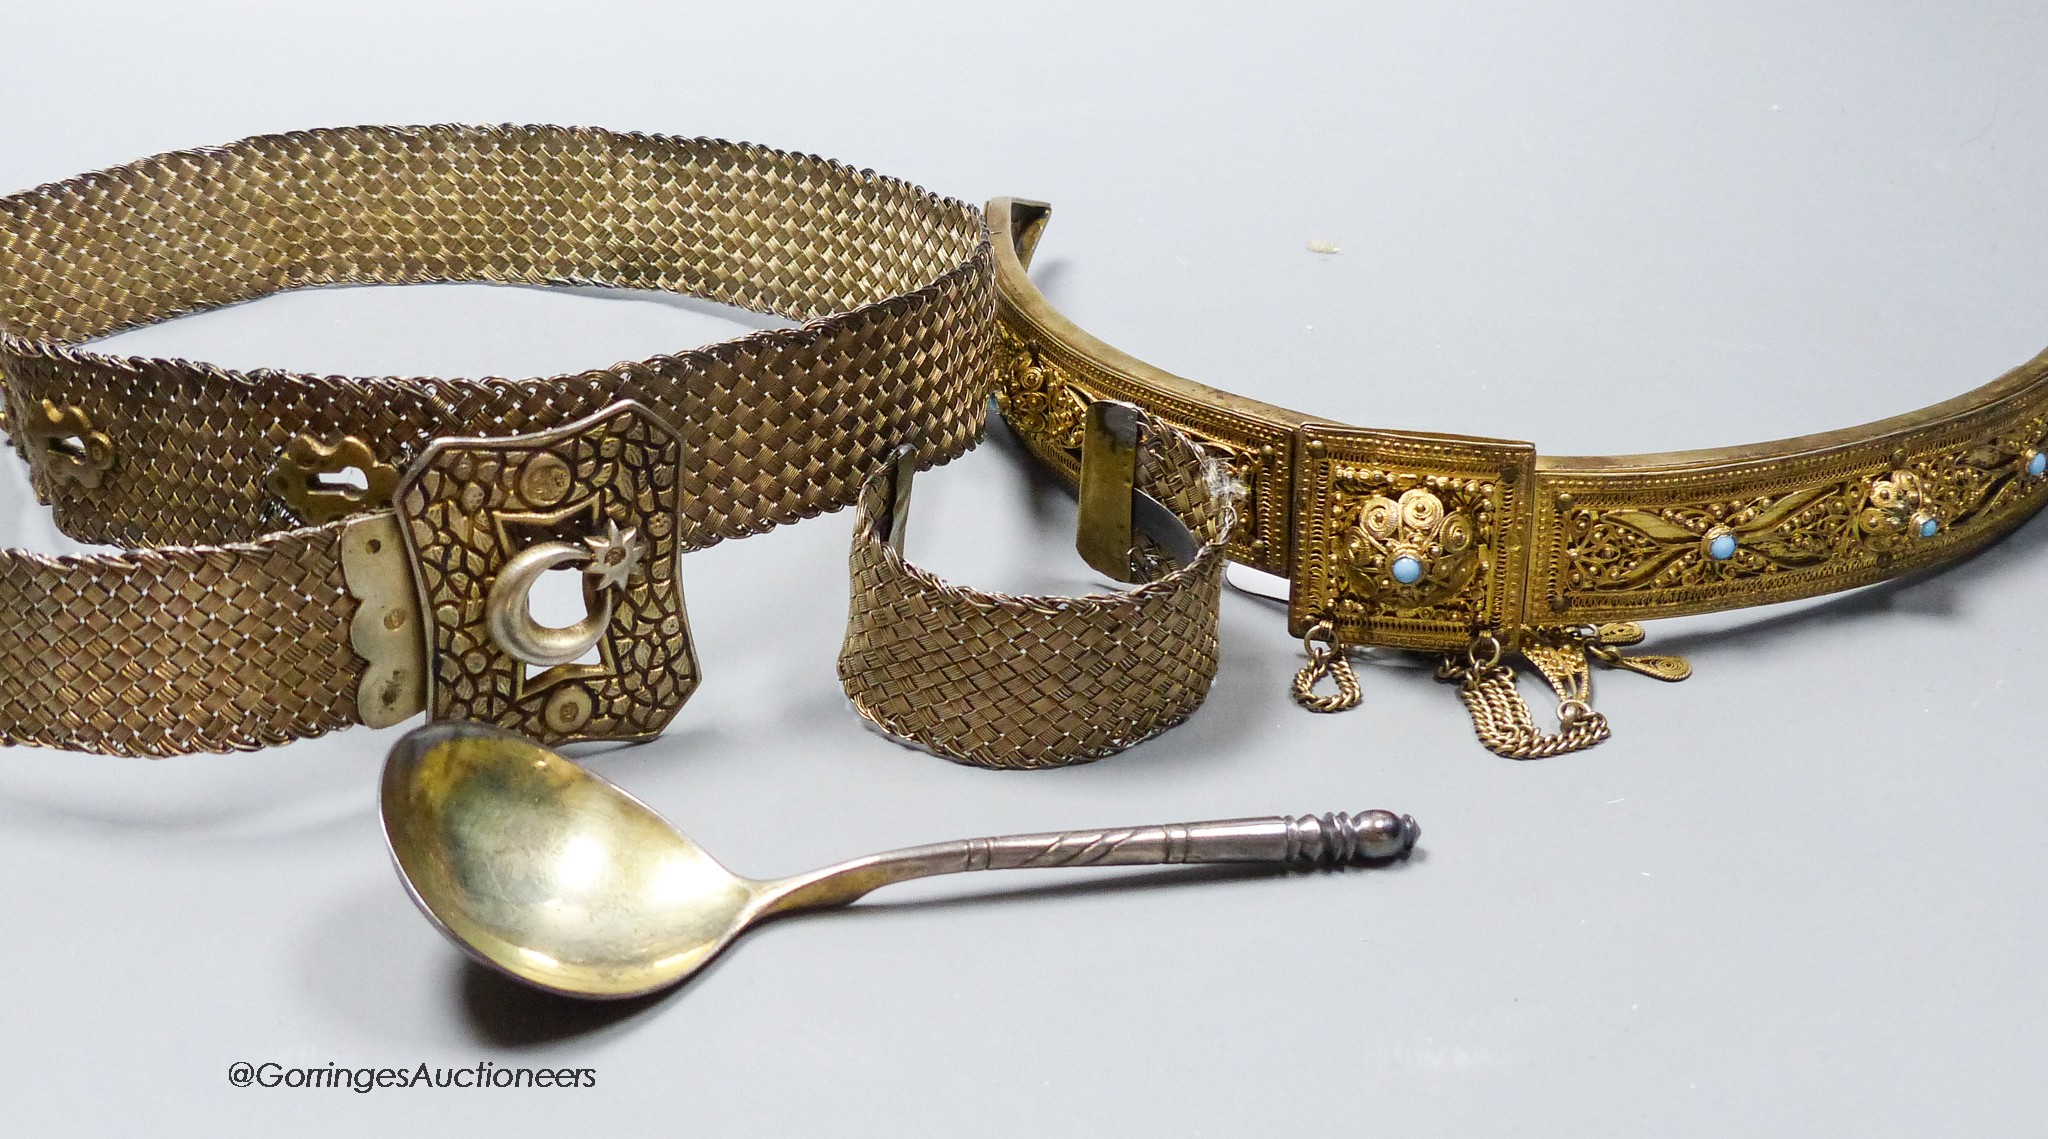 A late 19th century Russian 84 zolotnik and niello spoon, 14.8cm, a Russian gilt 84 zolotnik and turquoise set evening bag mount?, together with a Turkish metal belt and bangle.